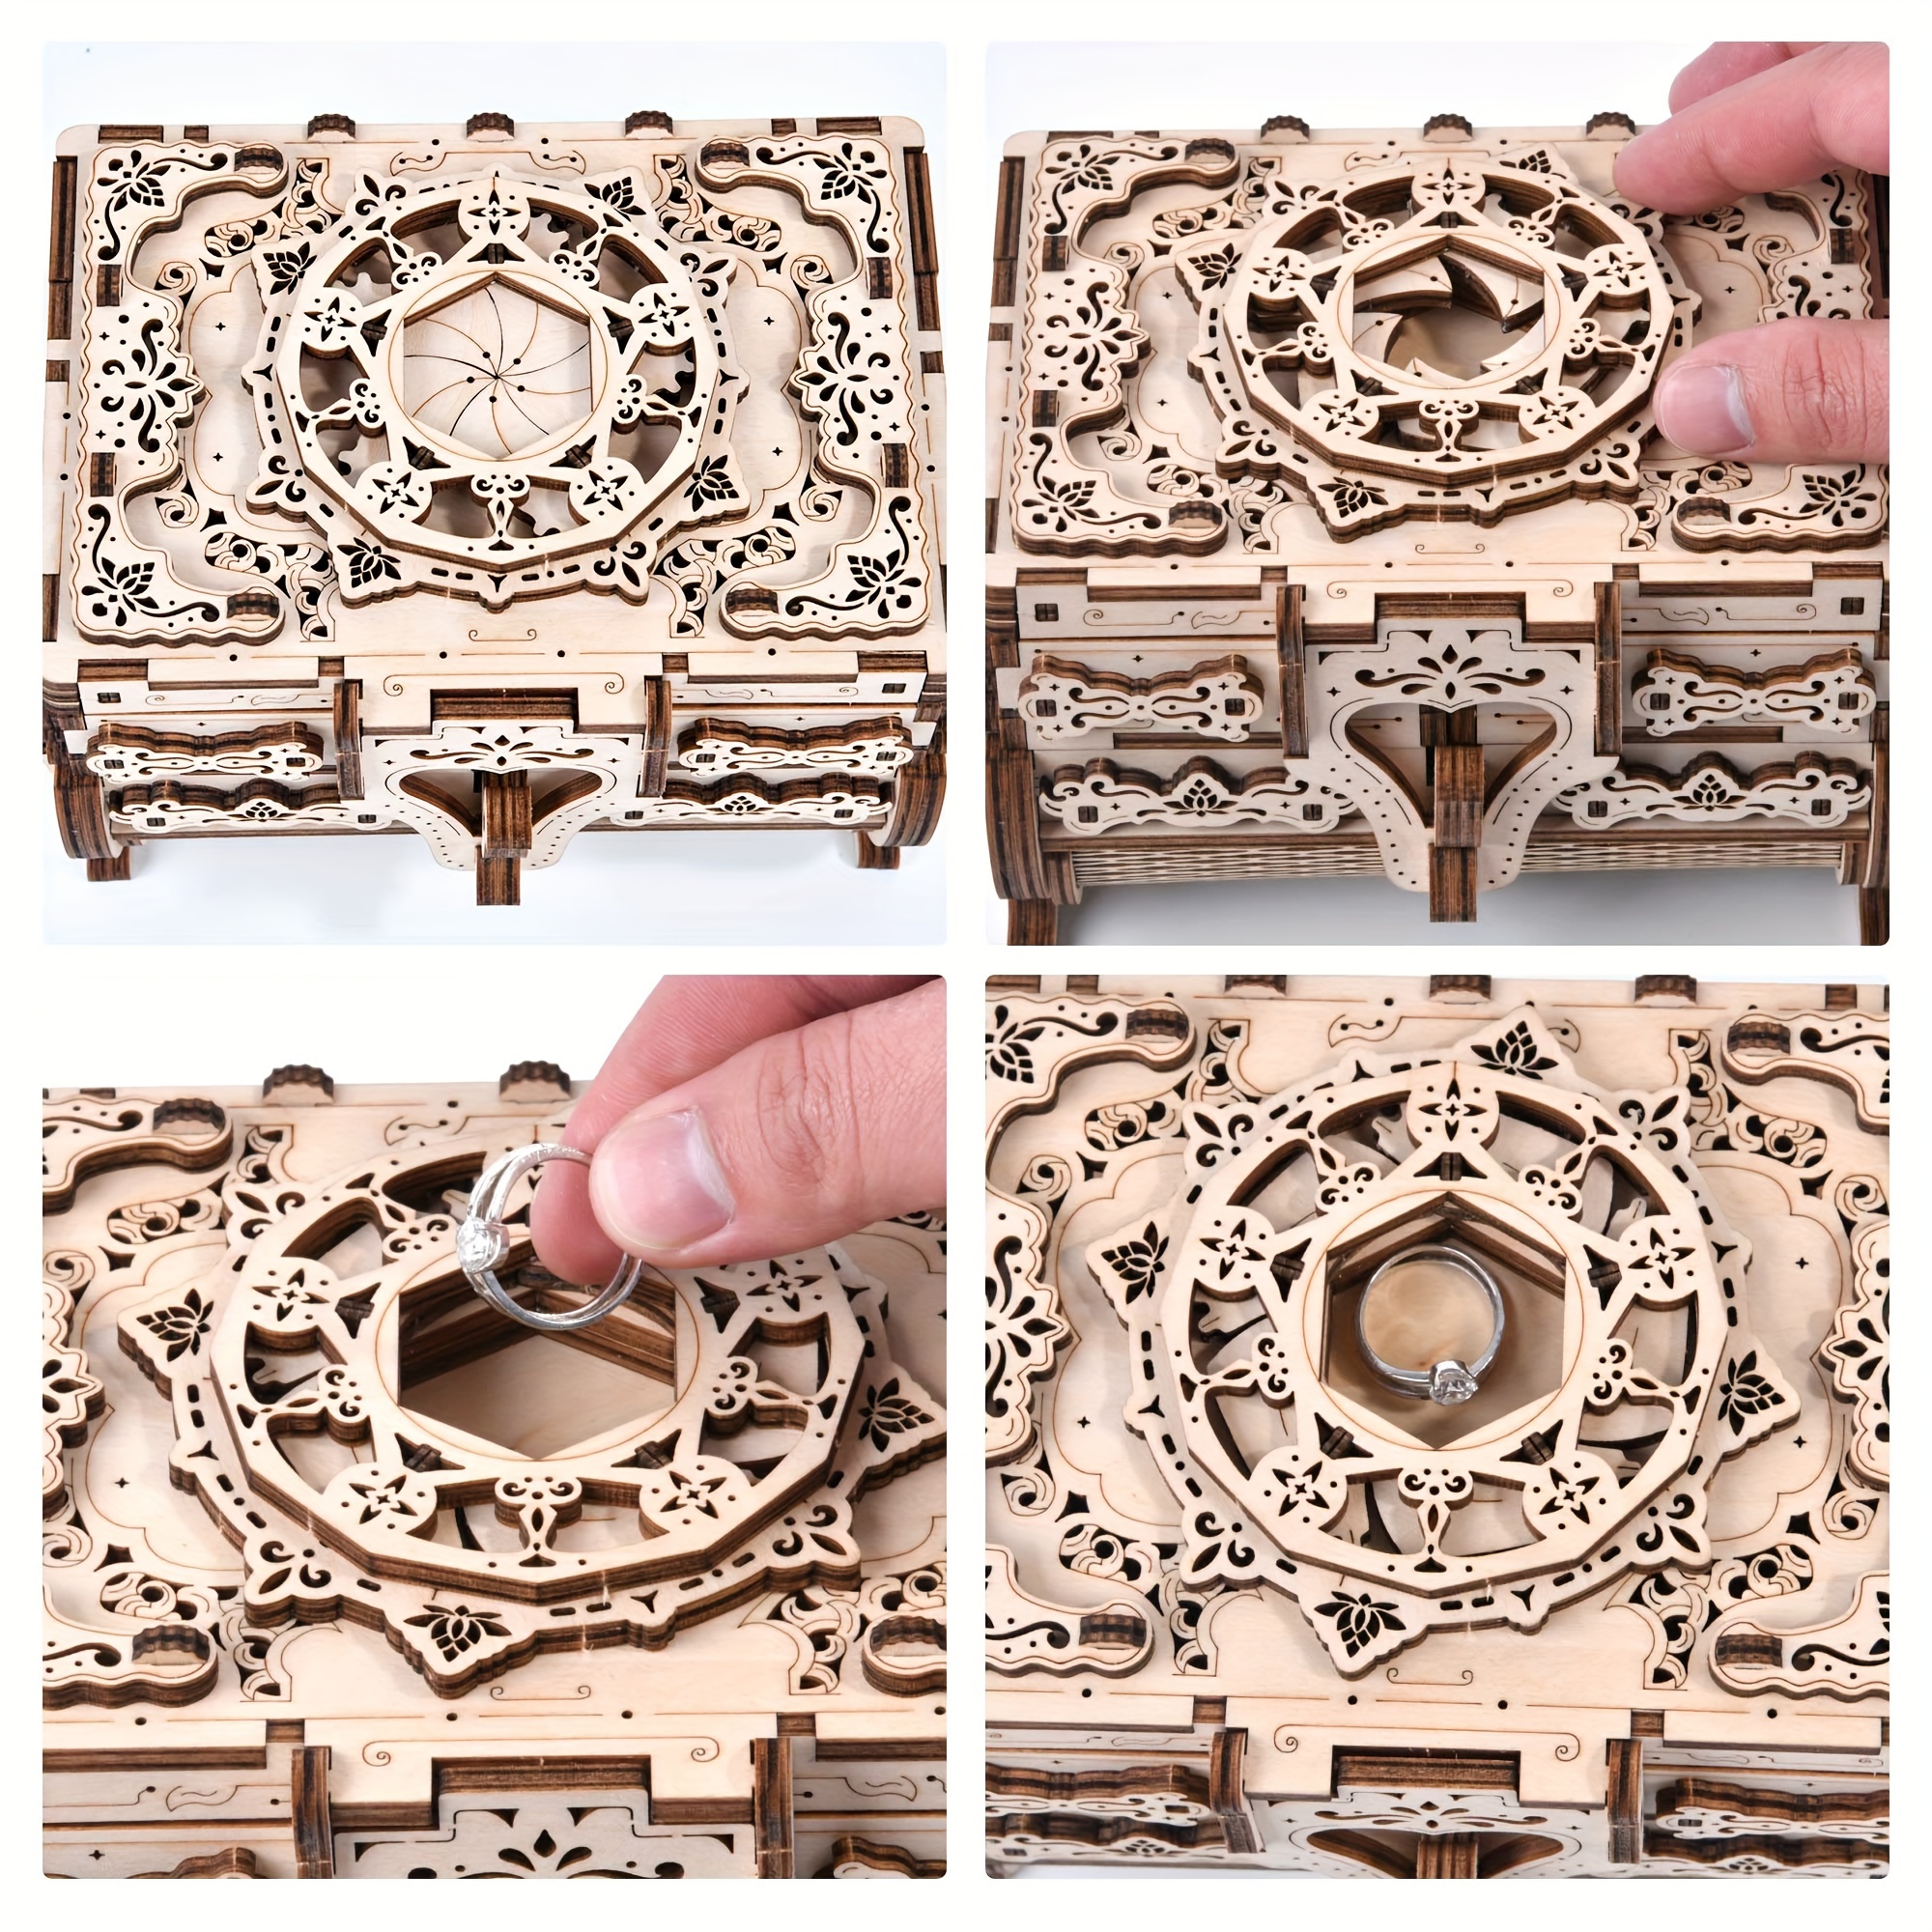 Robotime 3D Wooden Puzzles for Adults,LED Illuminated Wooden Globe  Puzzle,Model Building Kits 